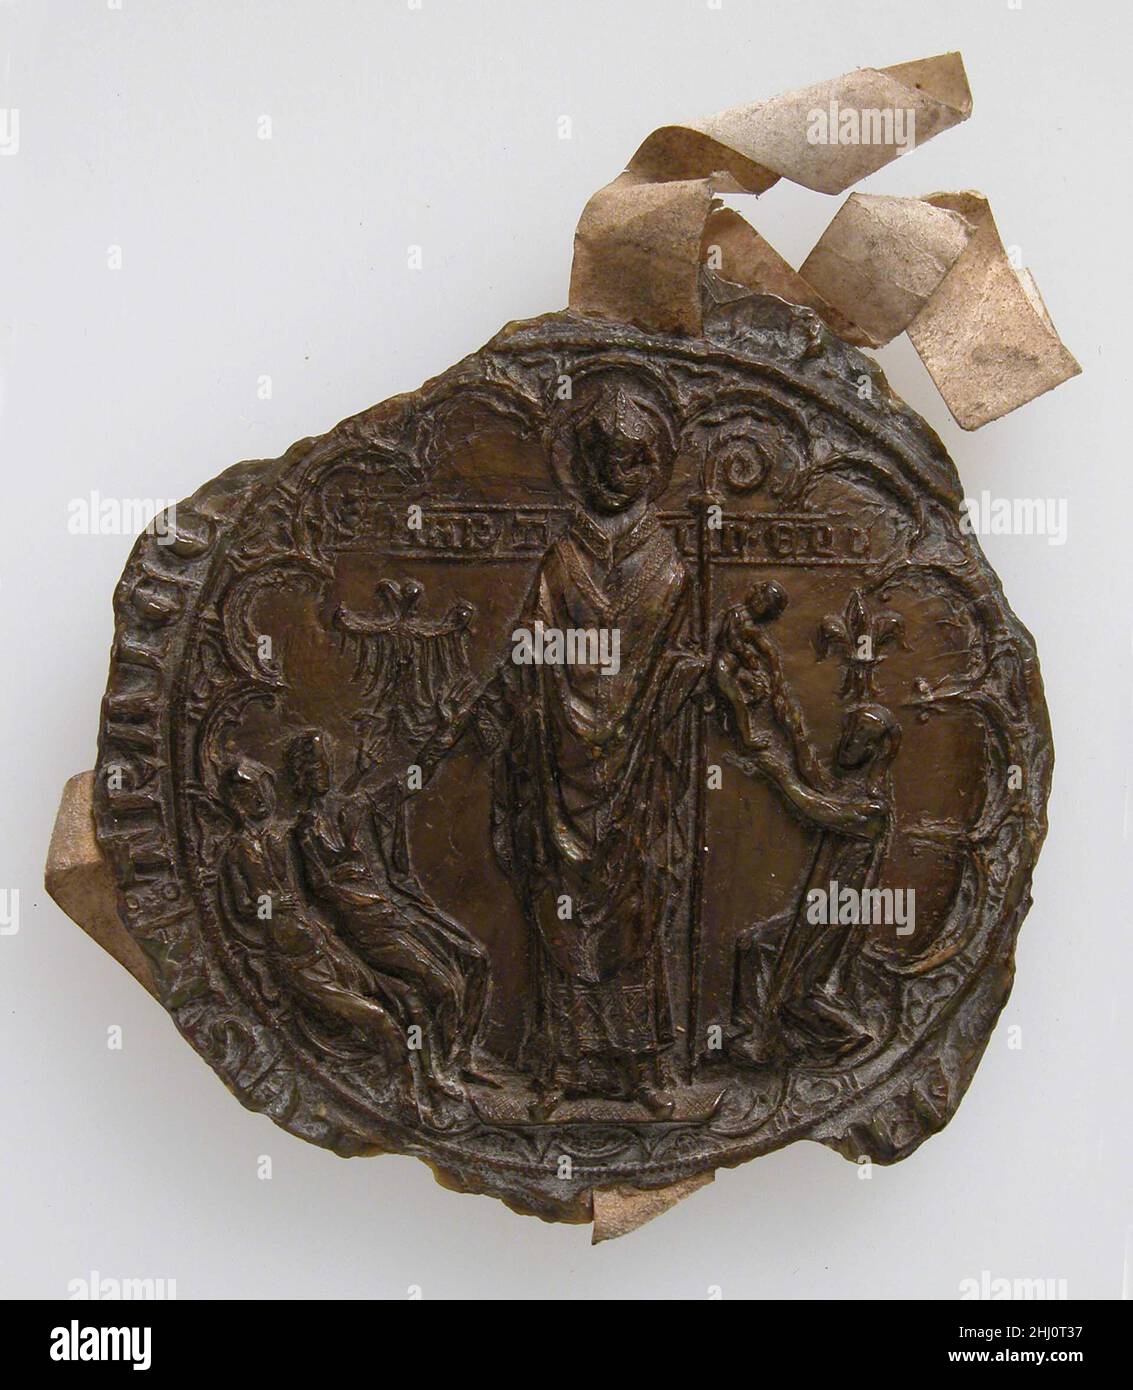 Seal Impression, Bishop 14th century Netherlandish. Seal Impression, Bishop. Netherlandish. 14th century. Brown wax. Miscellaneous-Wax Stock Photo